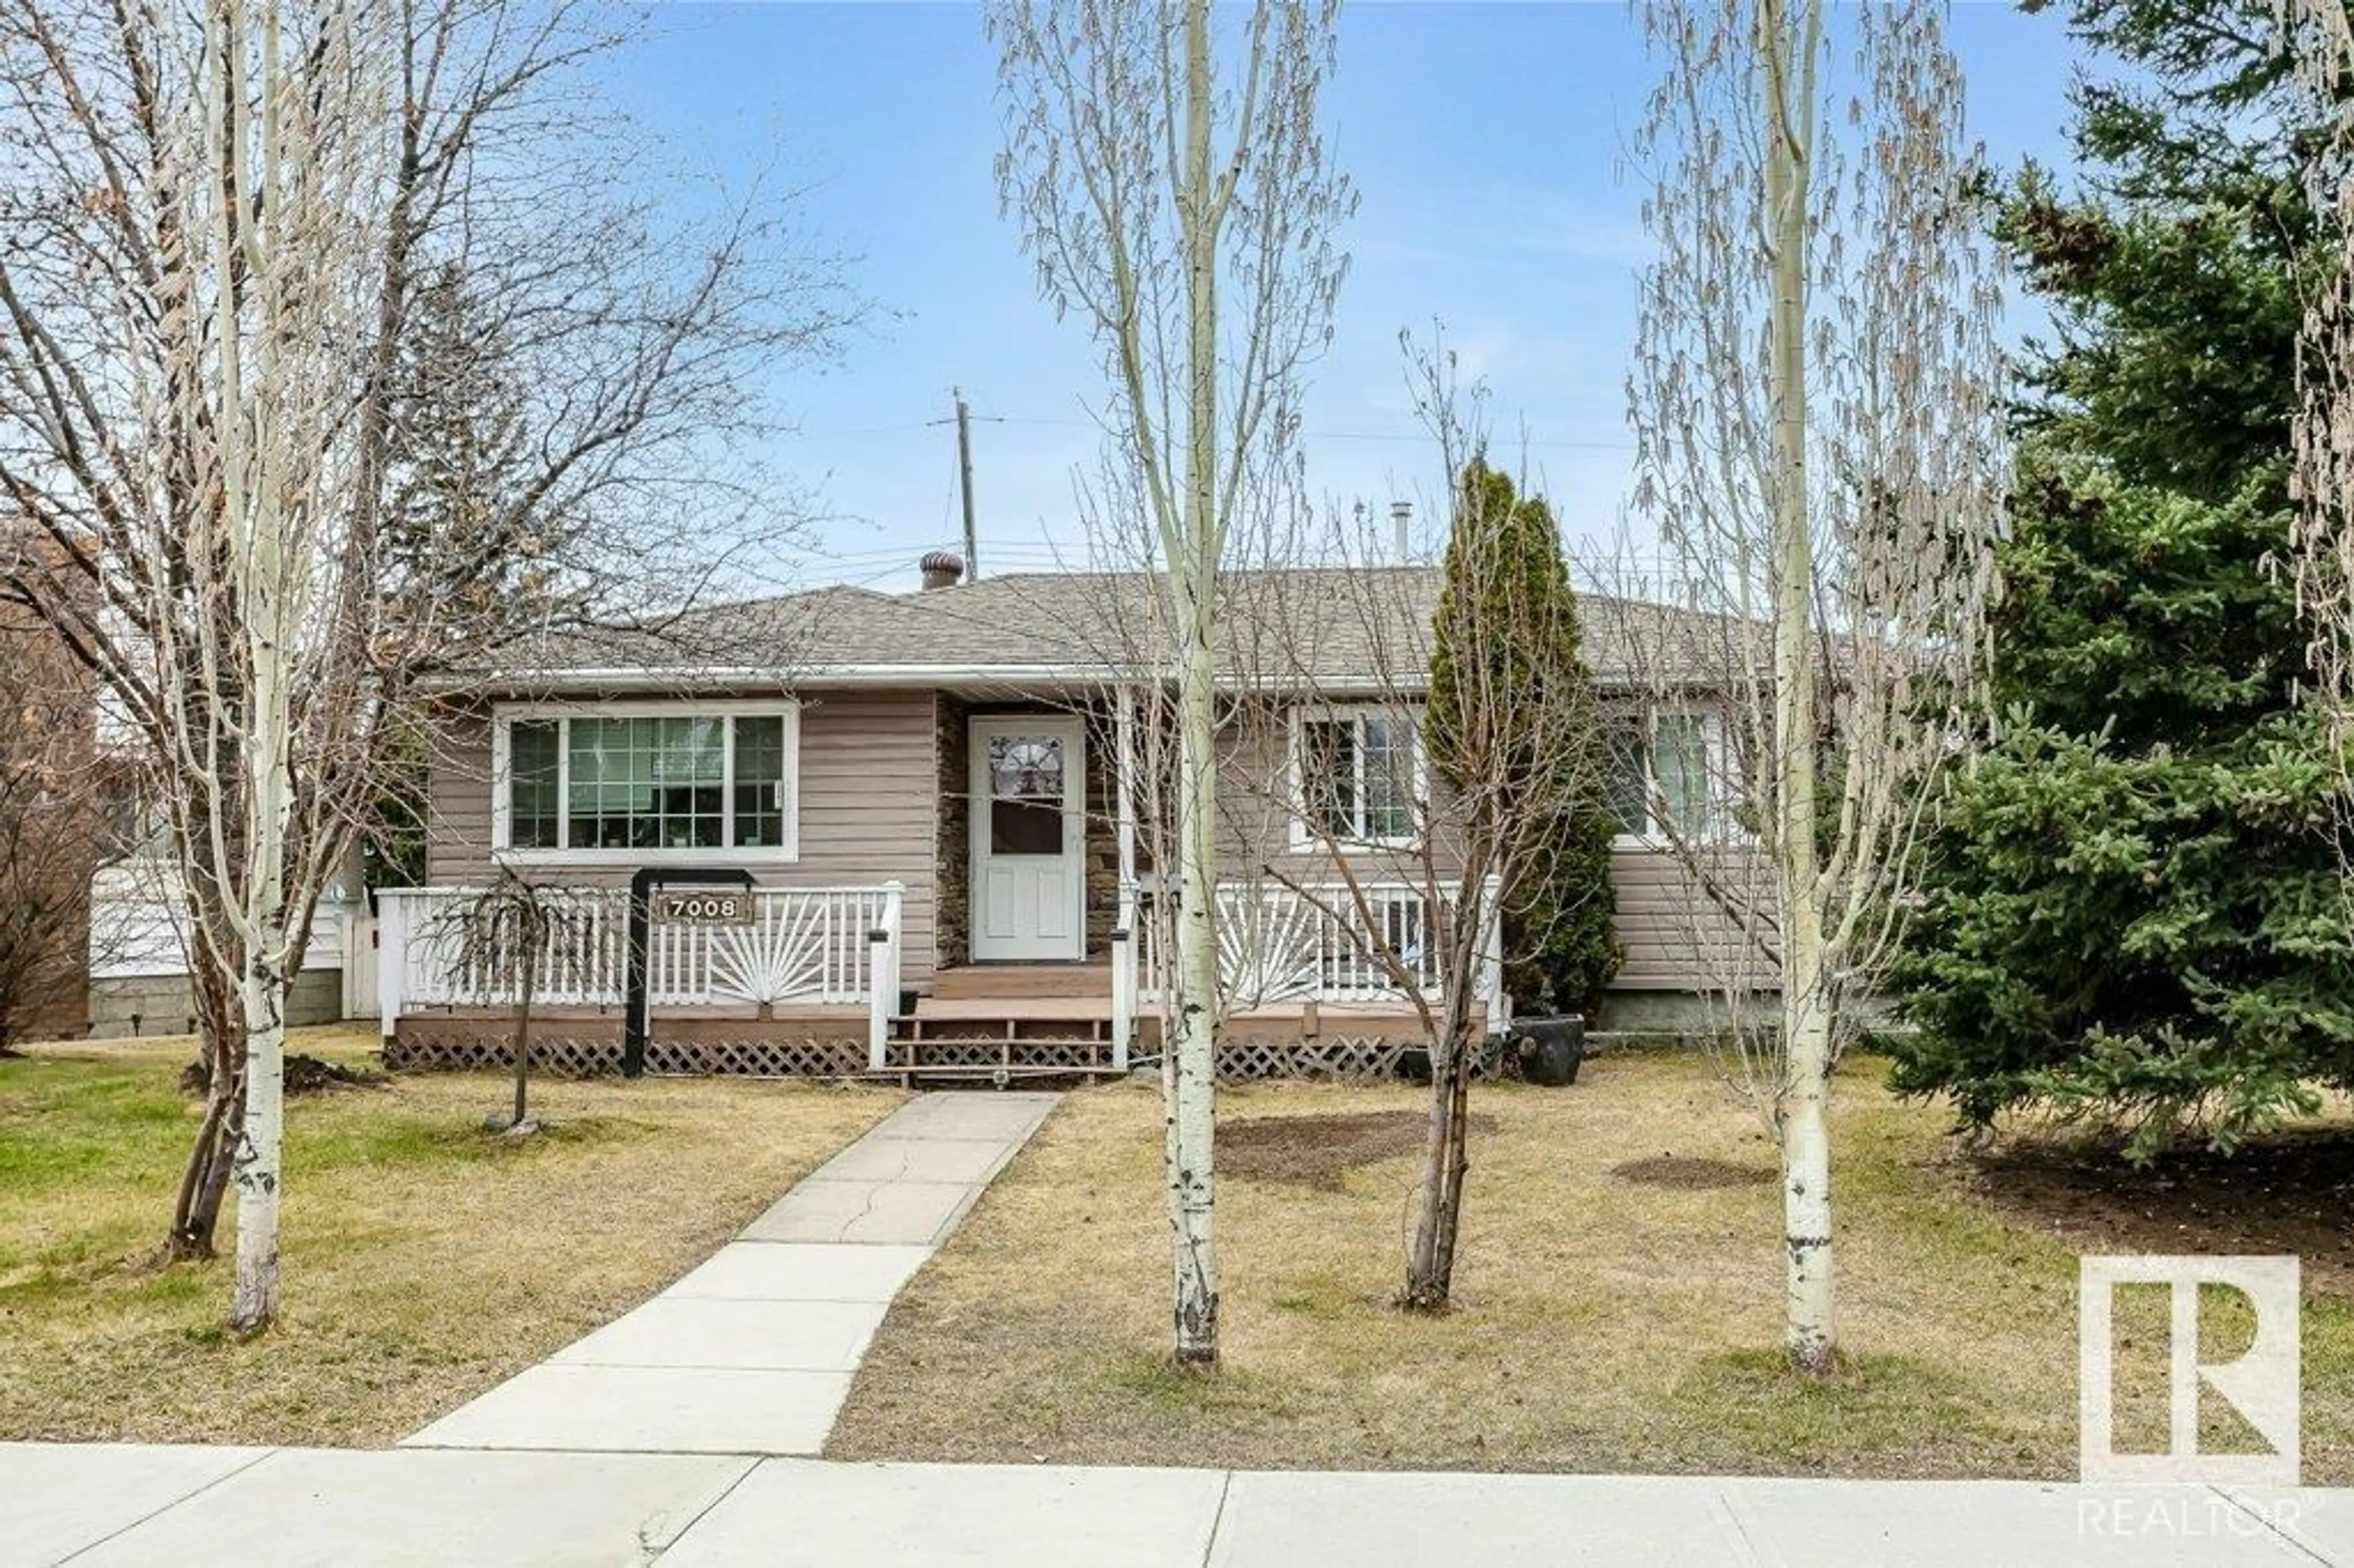 Outside view for 7008 76 ST NW, Edmonton Alberta T6C2J5